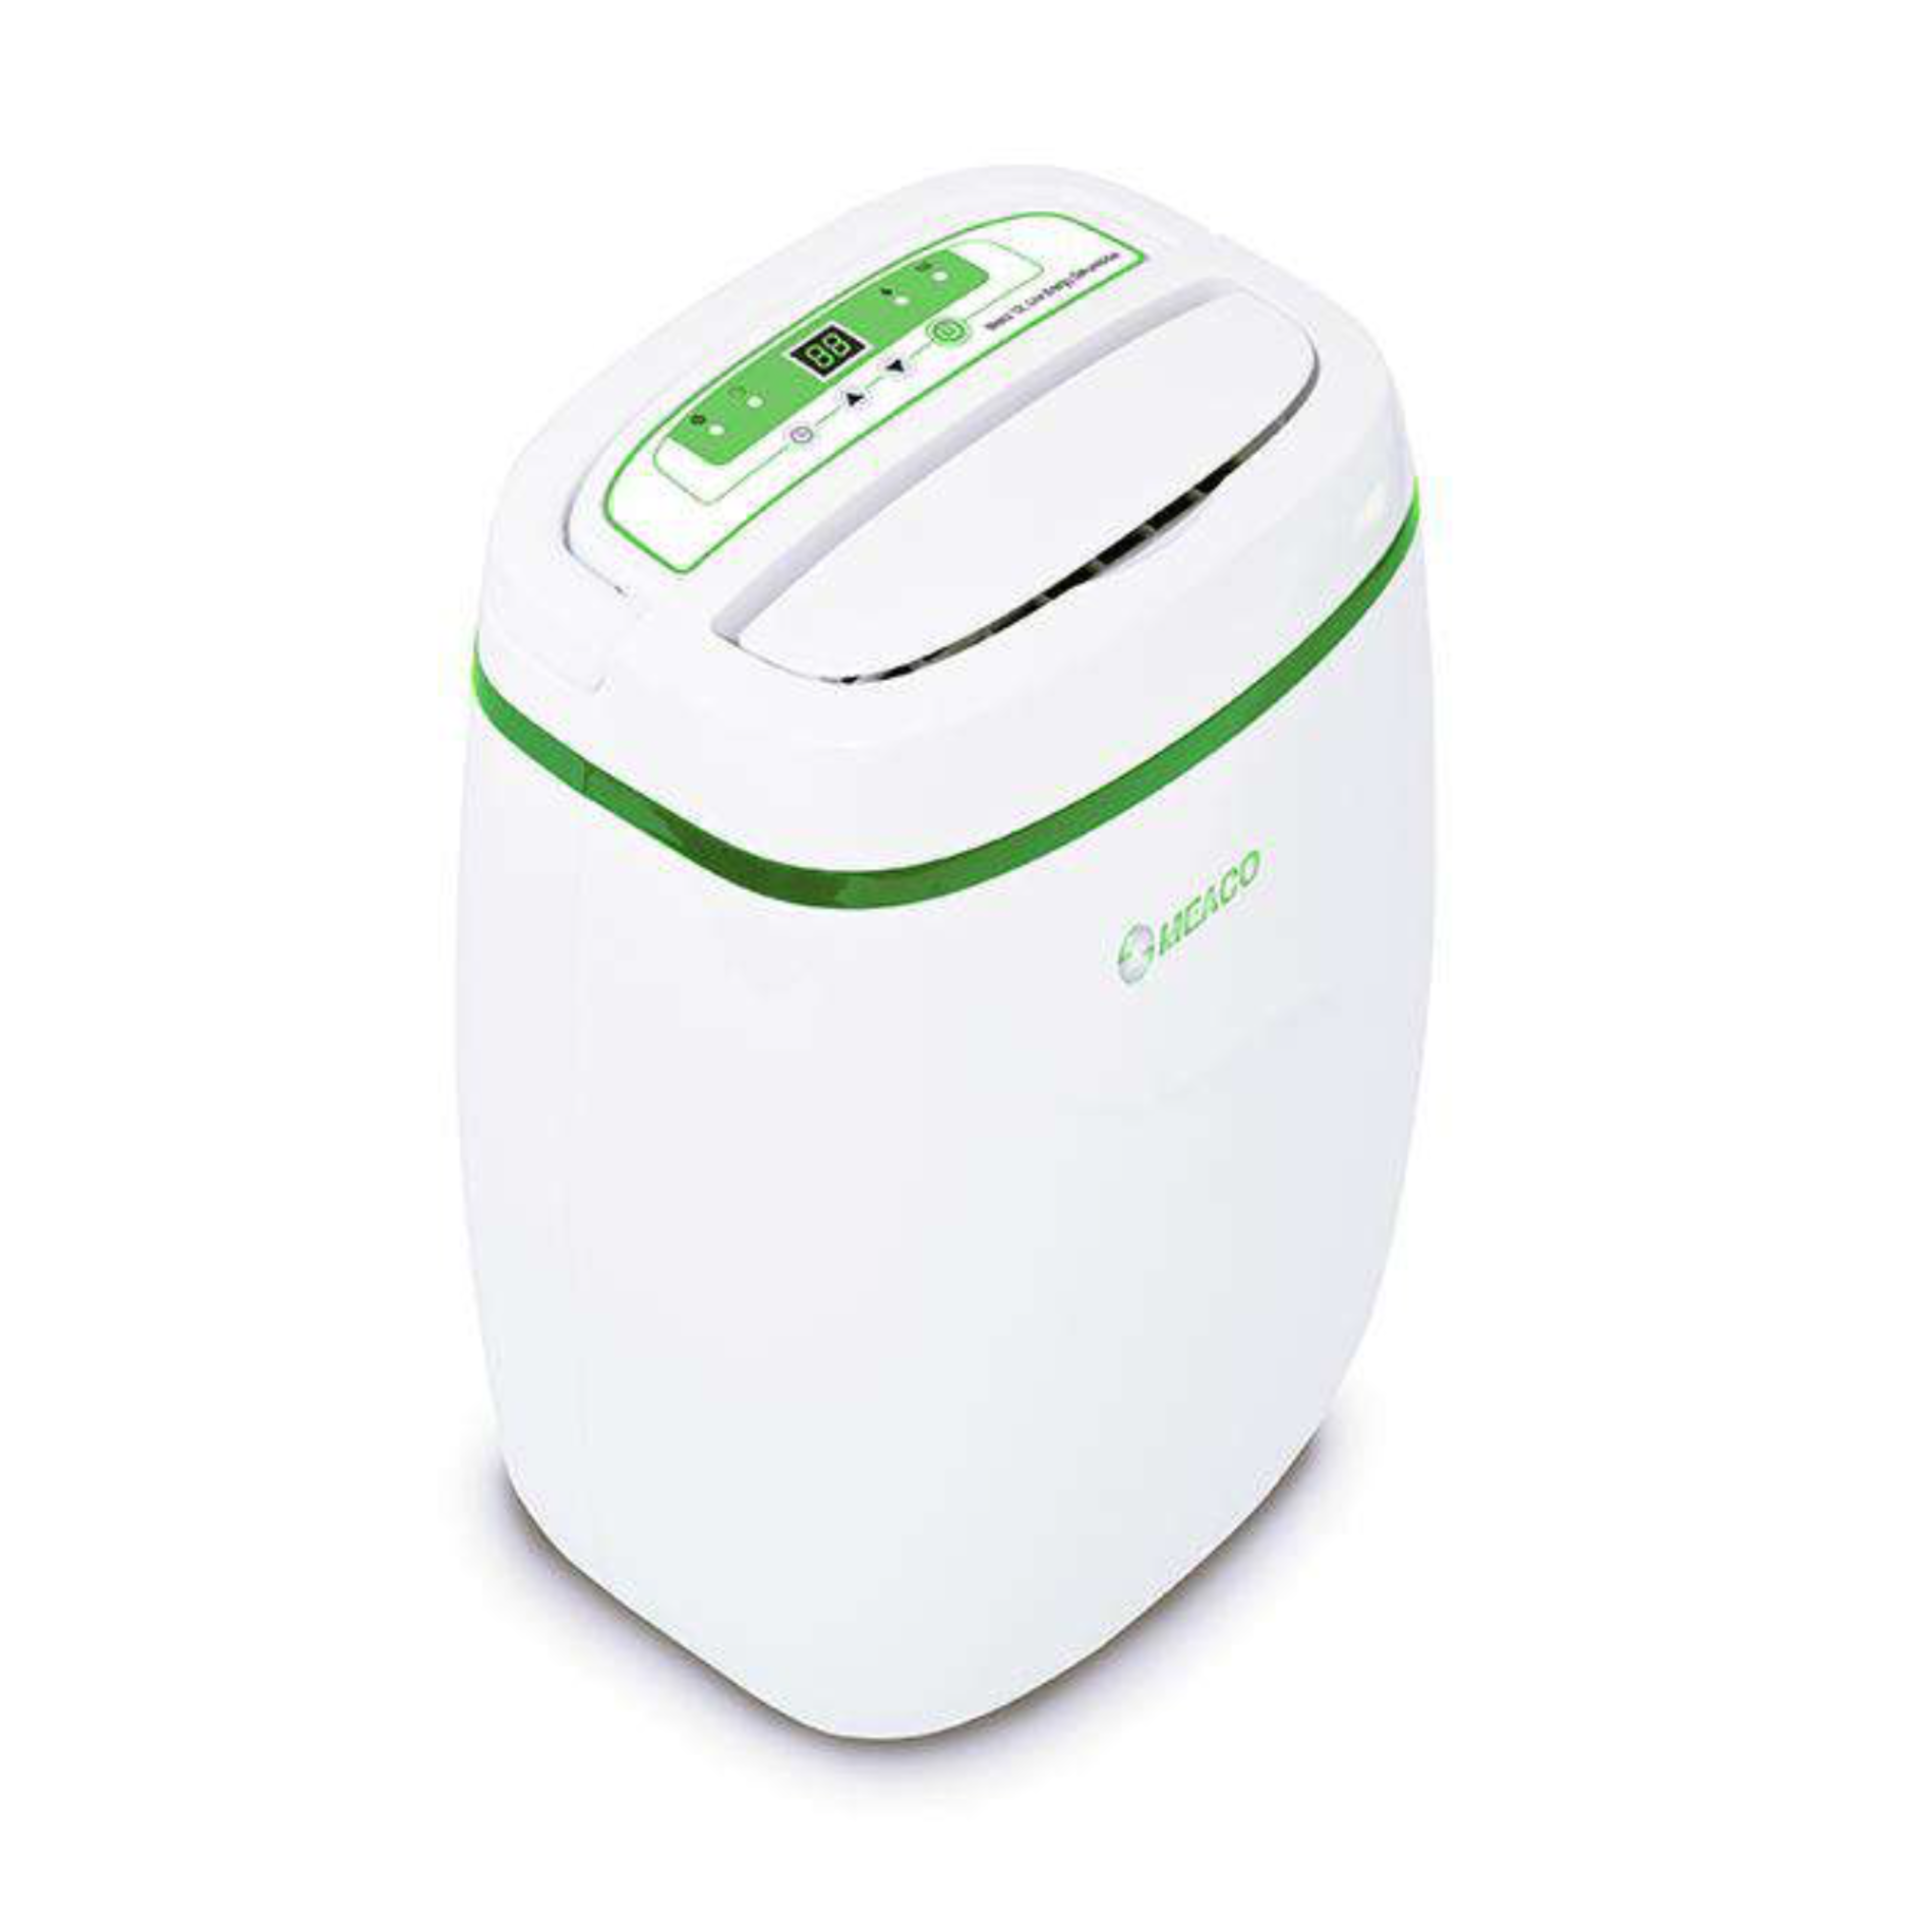 new meaco 12l low energy dehumidifier and air purifier rrp £199